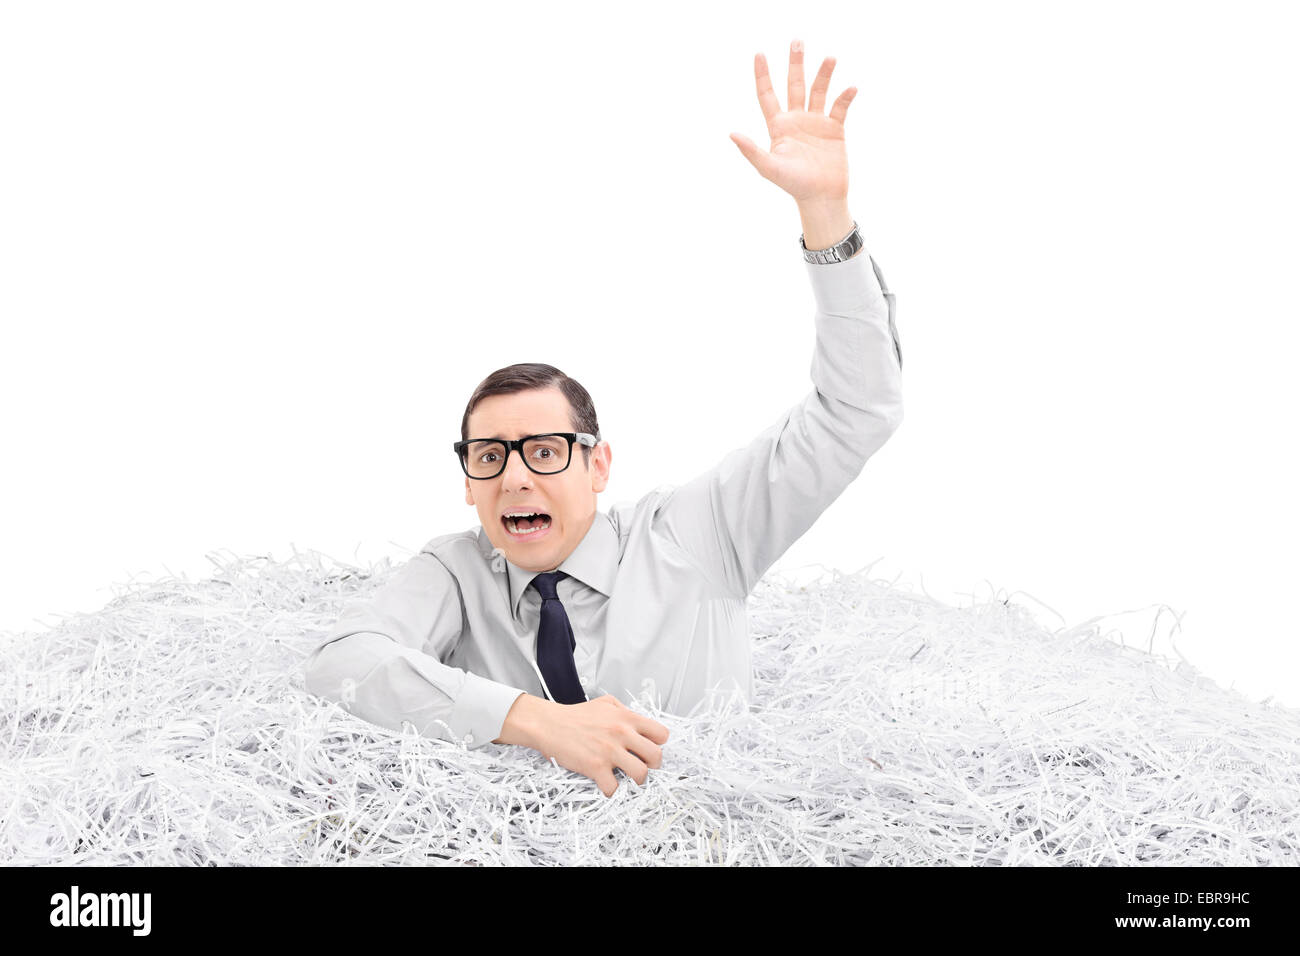 Helpless man drowning in a pile of shredded paper isolated on white background Stock Photo